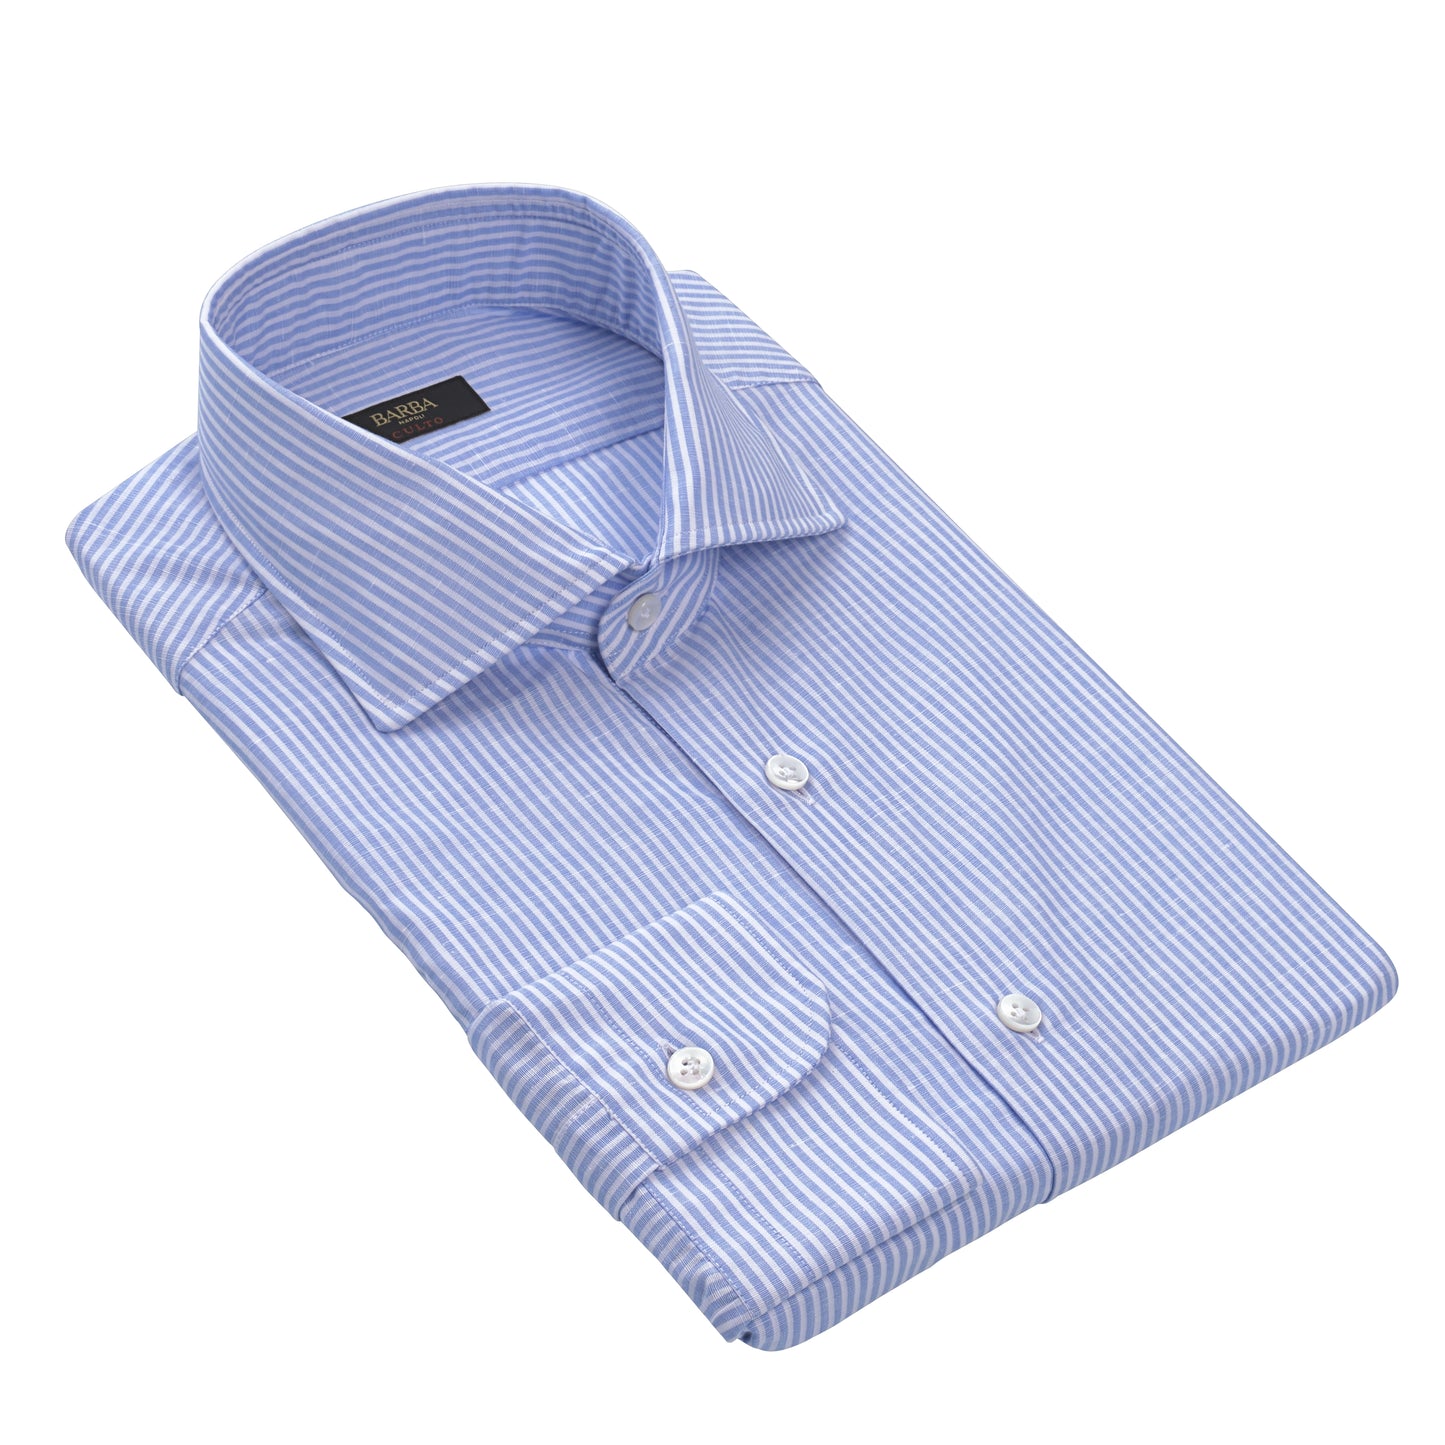 Striped Linen-Cotton Blend Shirt in Light Blue and White